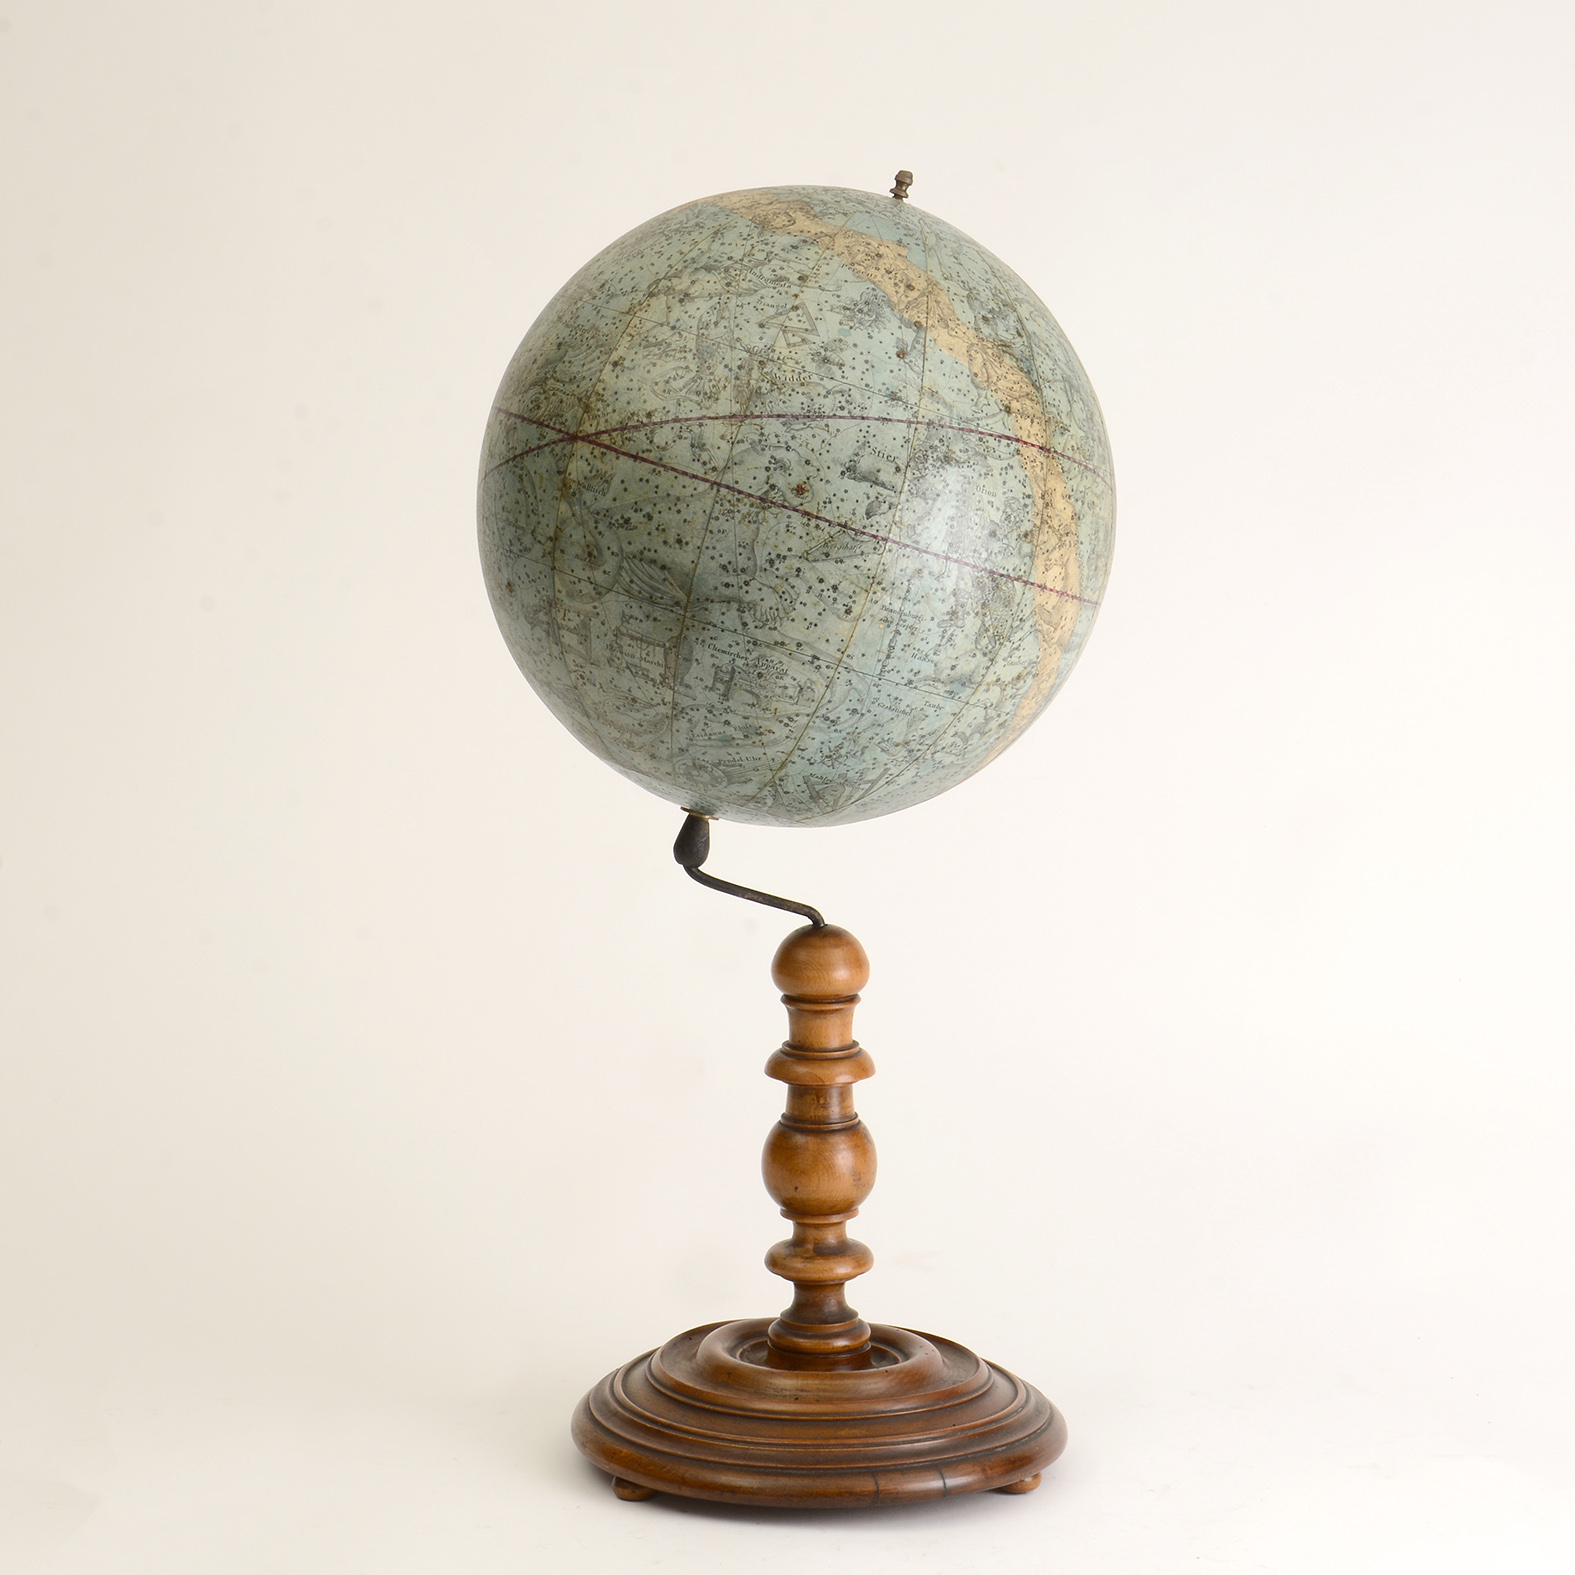 A Celestial Globe by Joseph Juettner (1775-1848), published by Schoeninger in Vienna